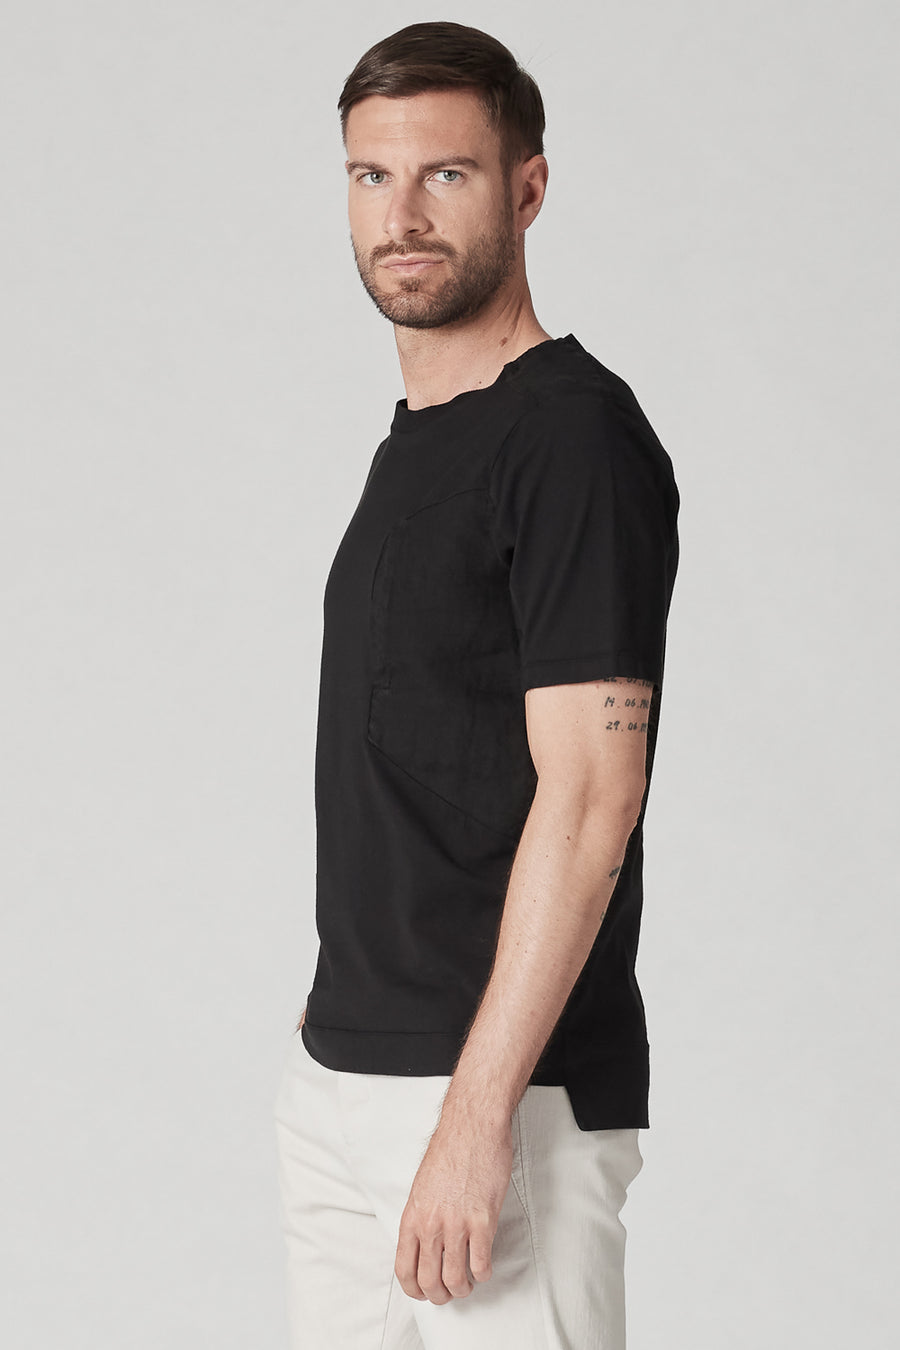 Buy the Transit Cotton Jersey T-Shirt W/ Linen Inserts Black at Intro. Spend £50 for free UK delivery. Official stockists. We ship worldwide.